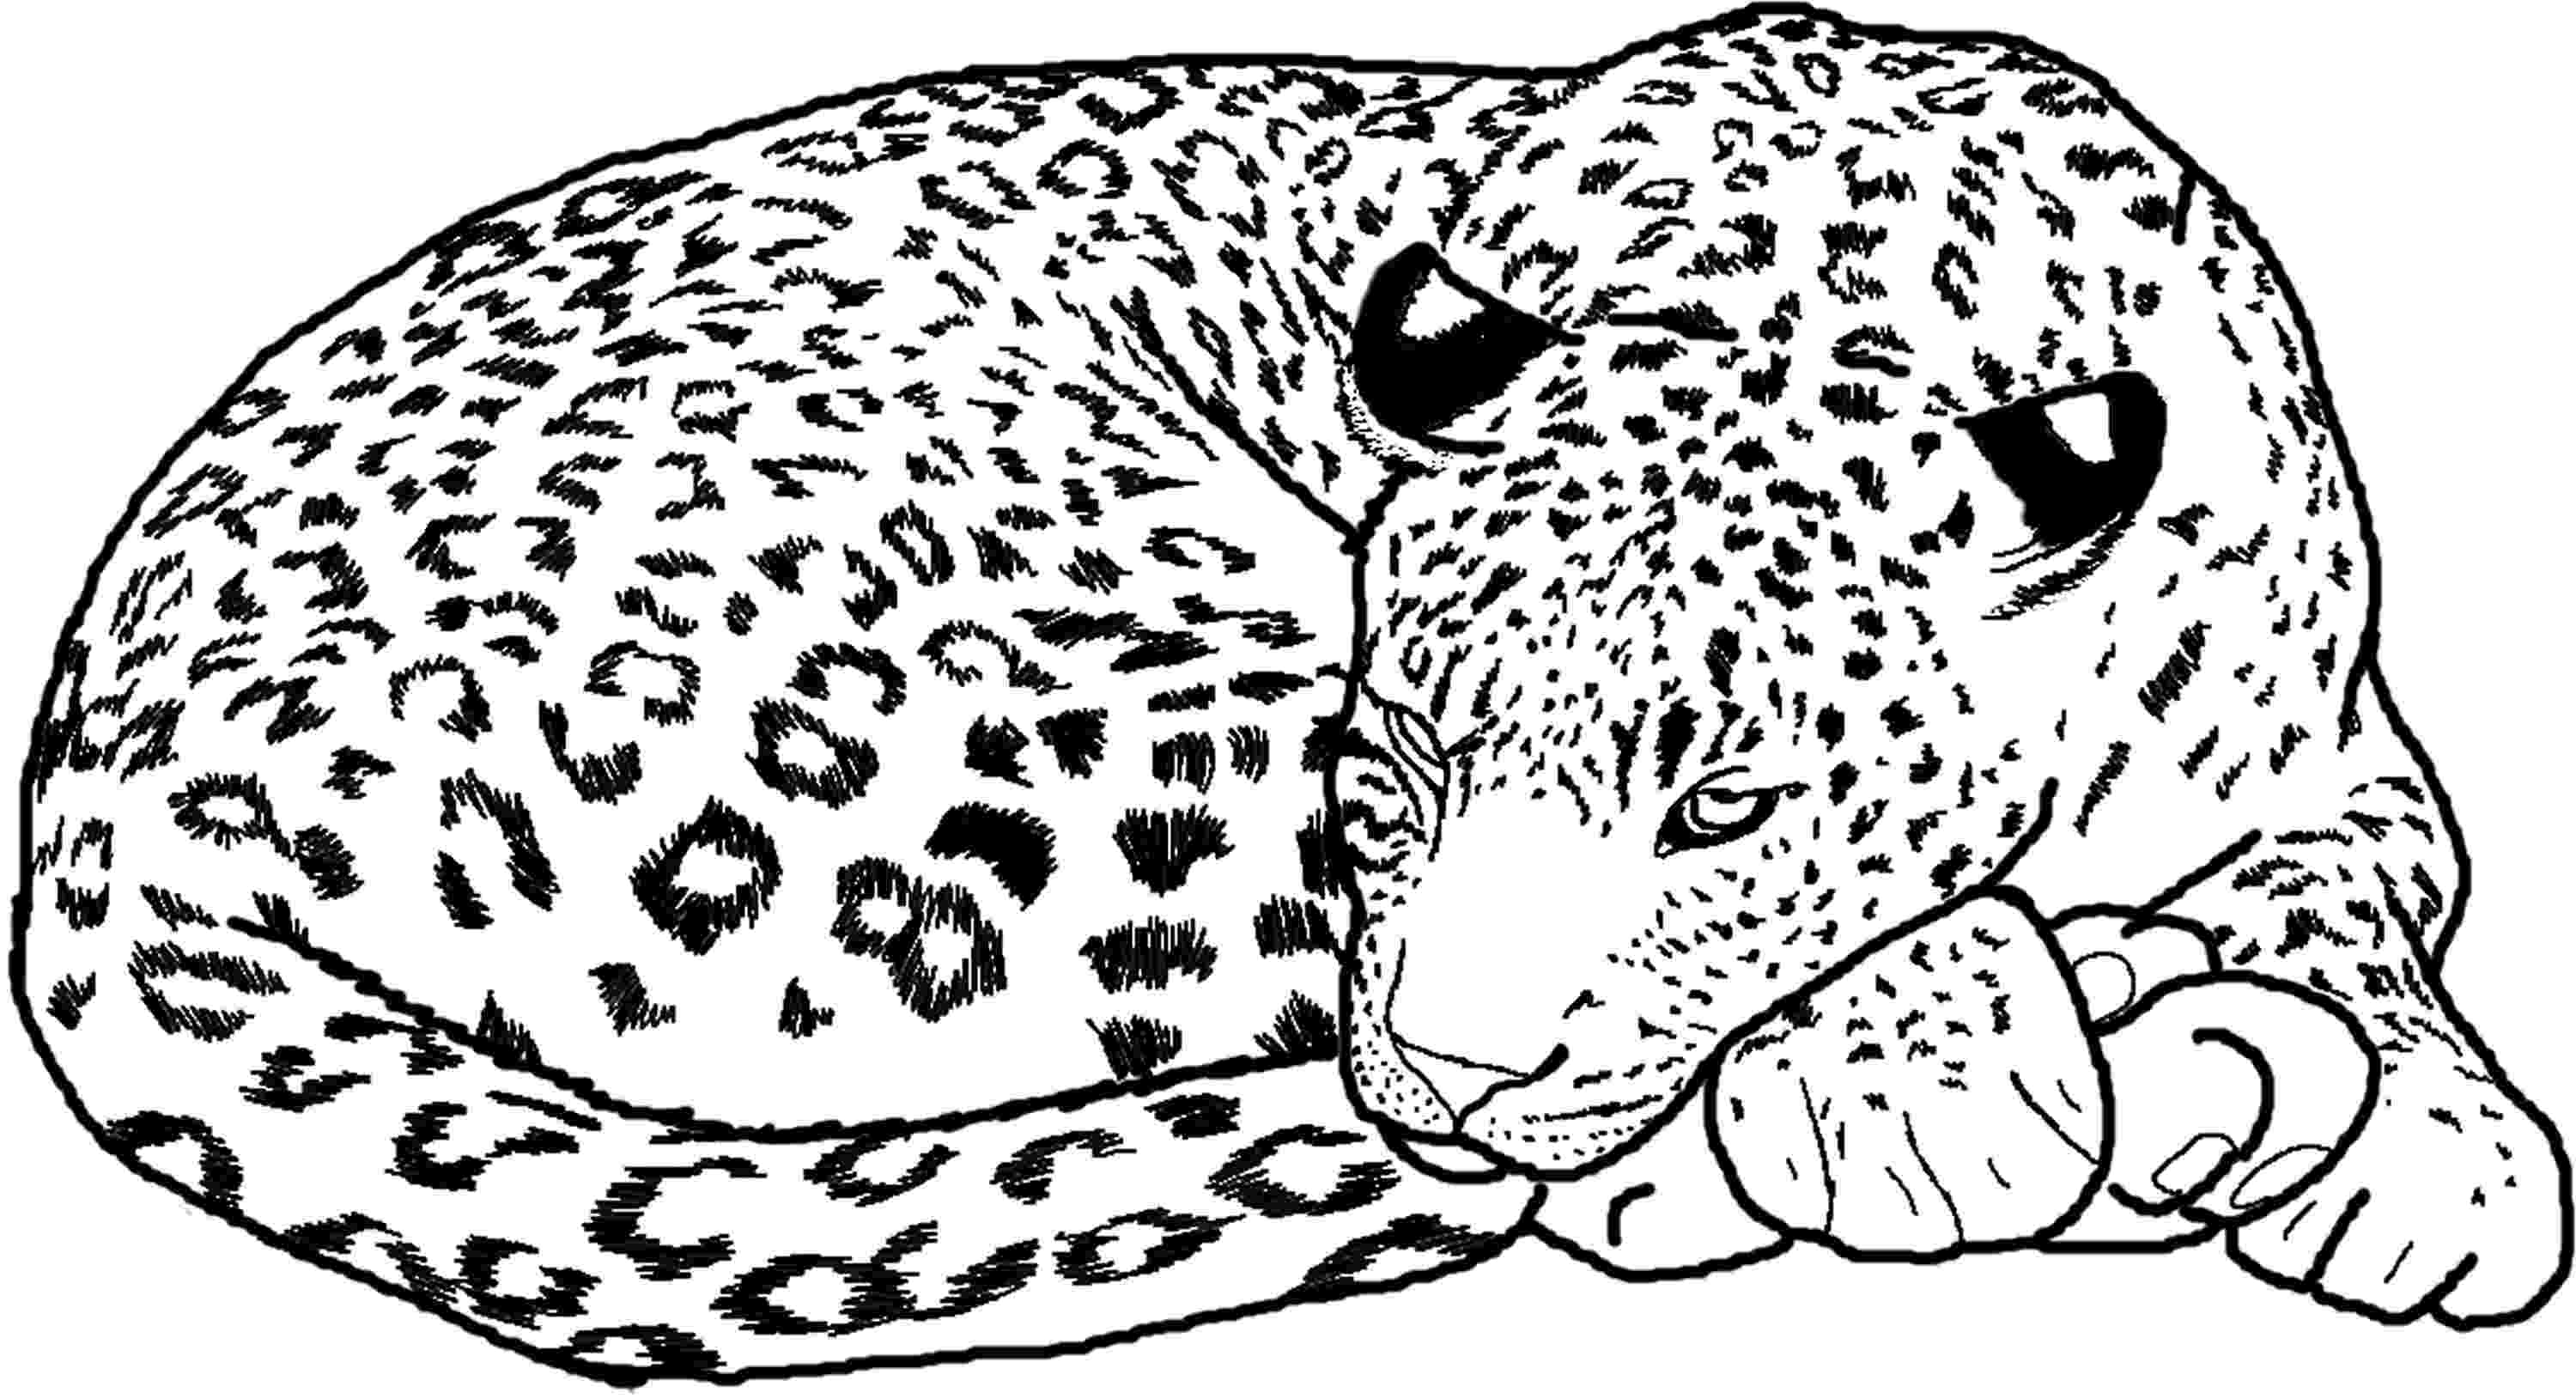 cheetah coloring pages for adults cheetah adult coloring page adult coloring coloring pages cheetah coloring adults for 